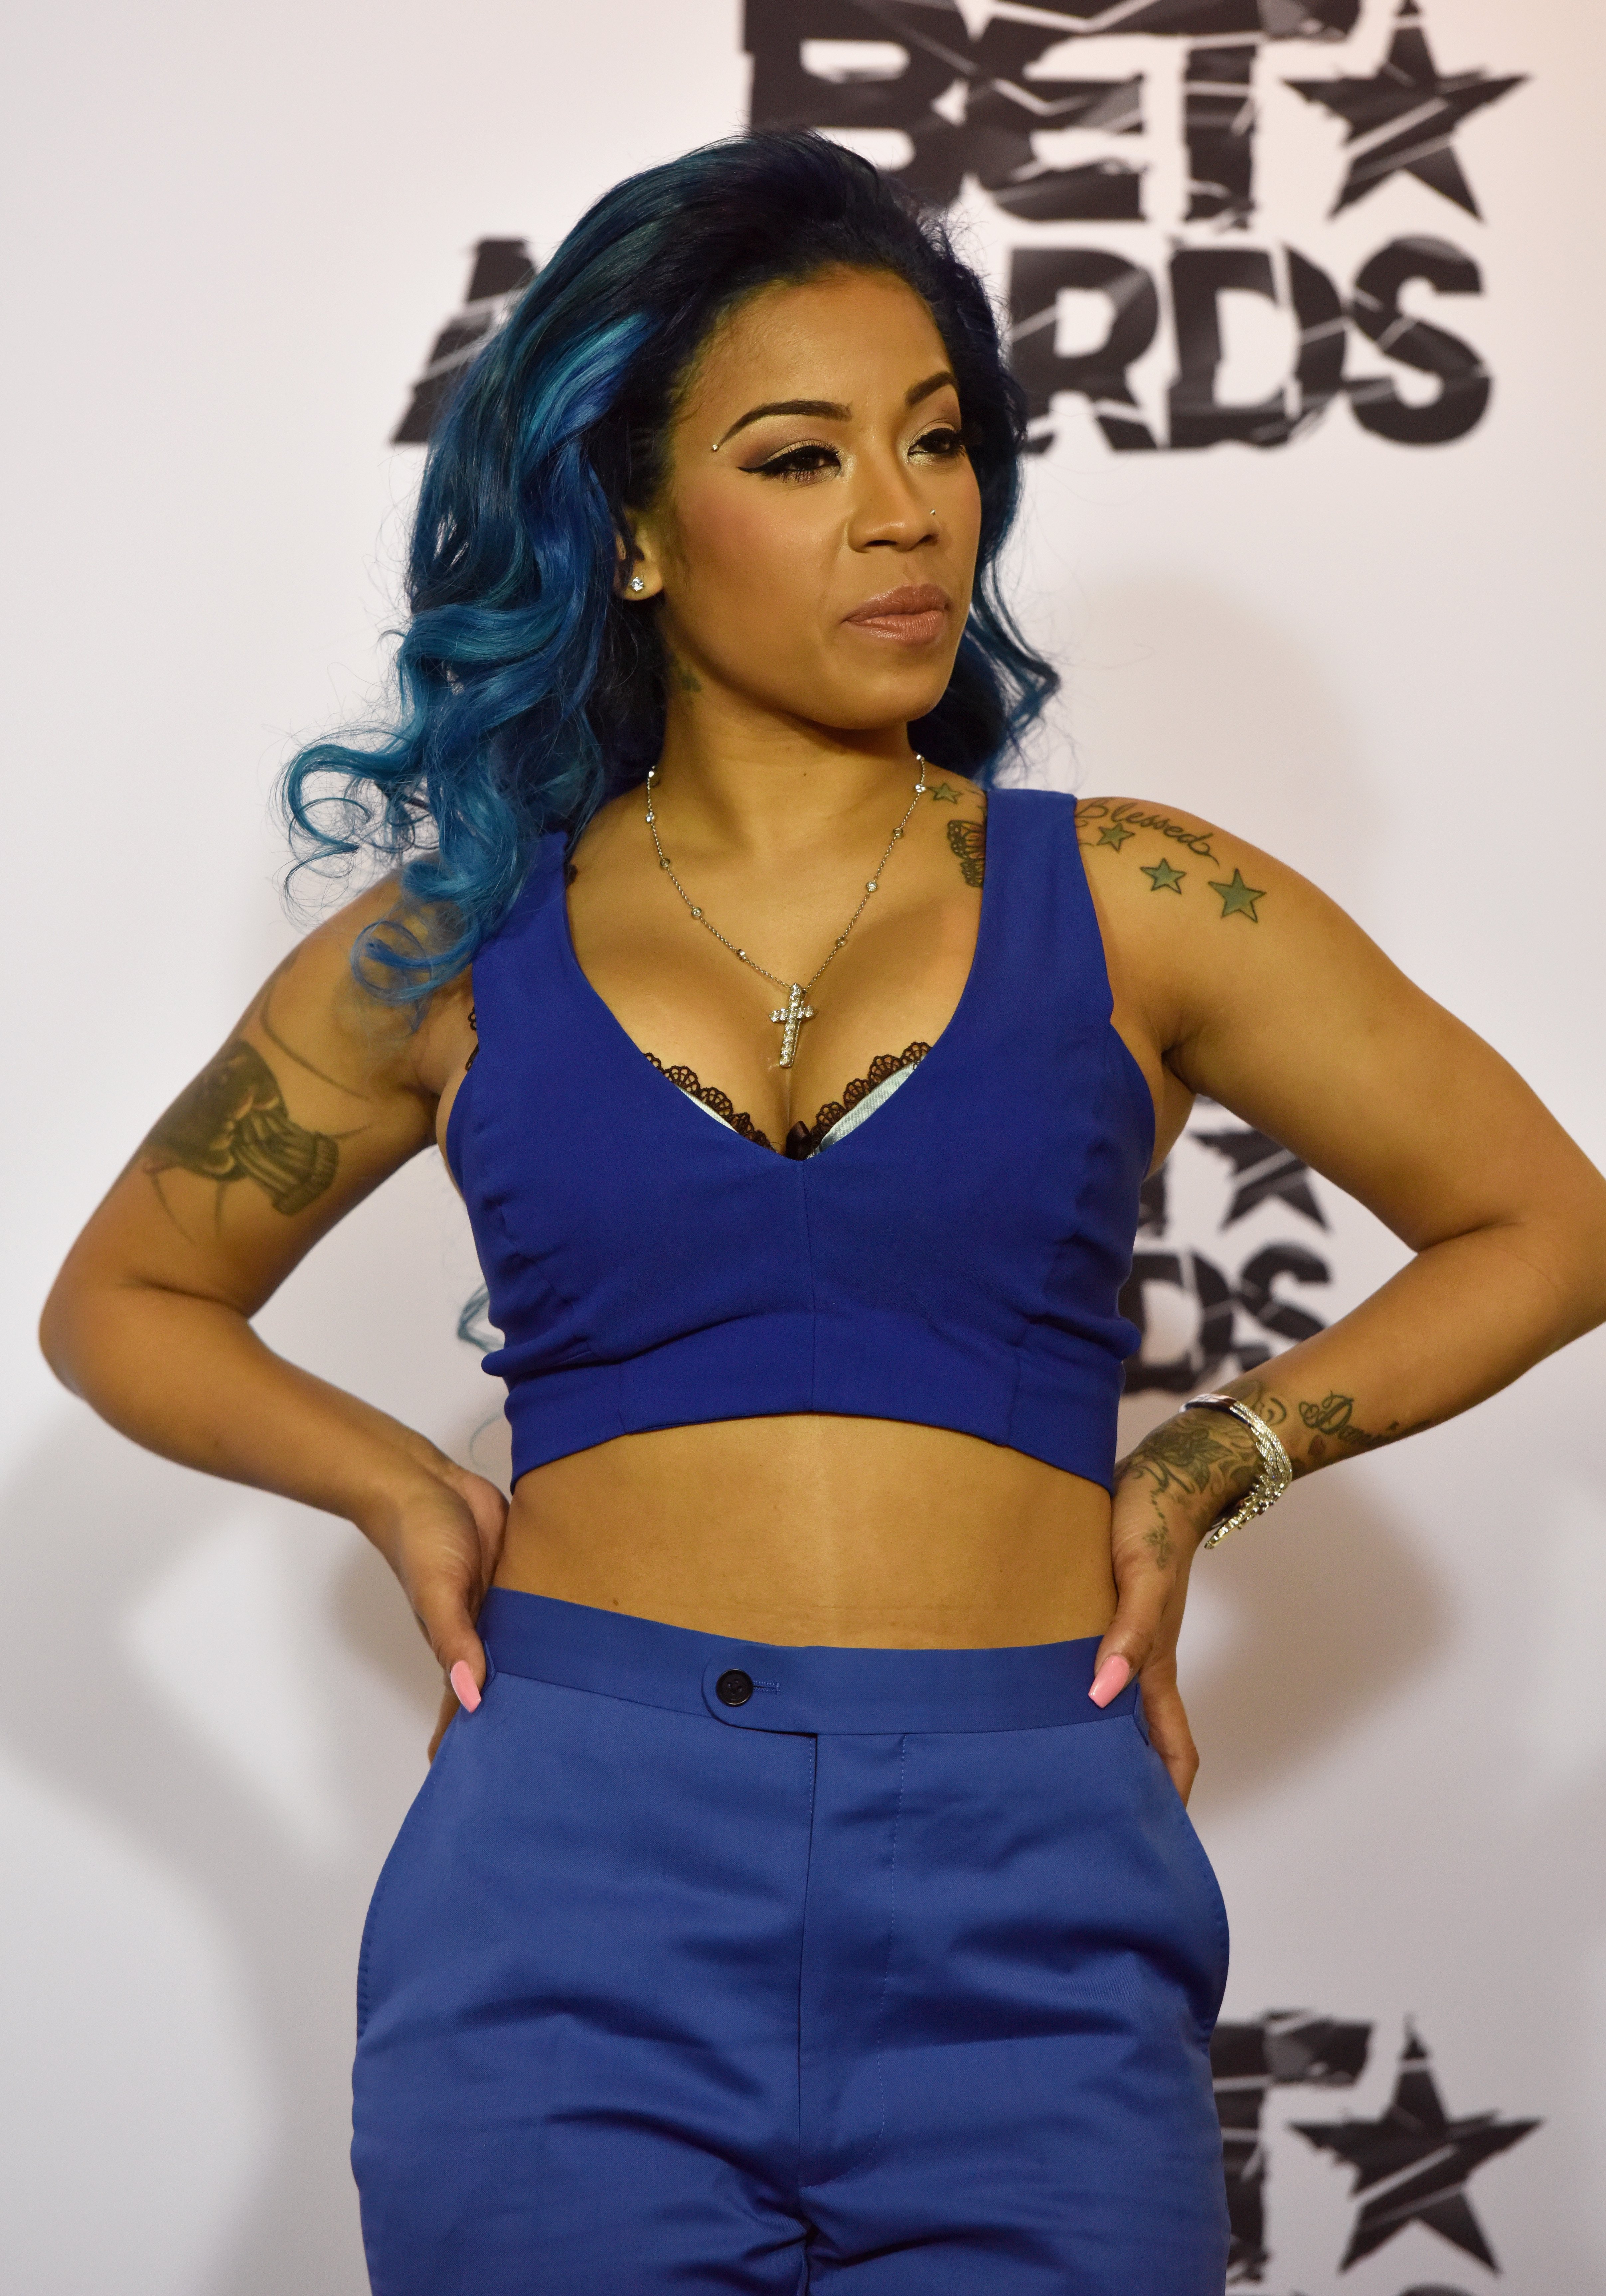 Keyshia Cole at the press room of the 2015 BET Awards. | Photo: Getty Images